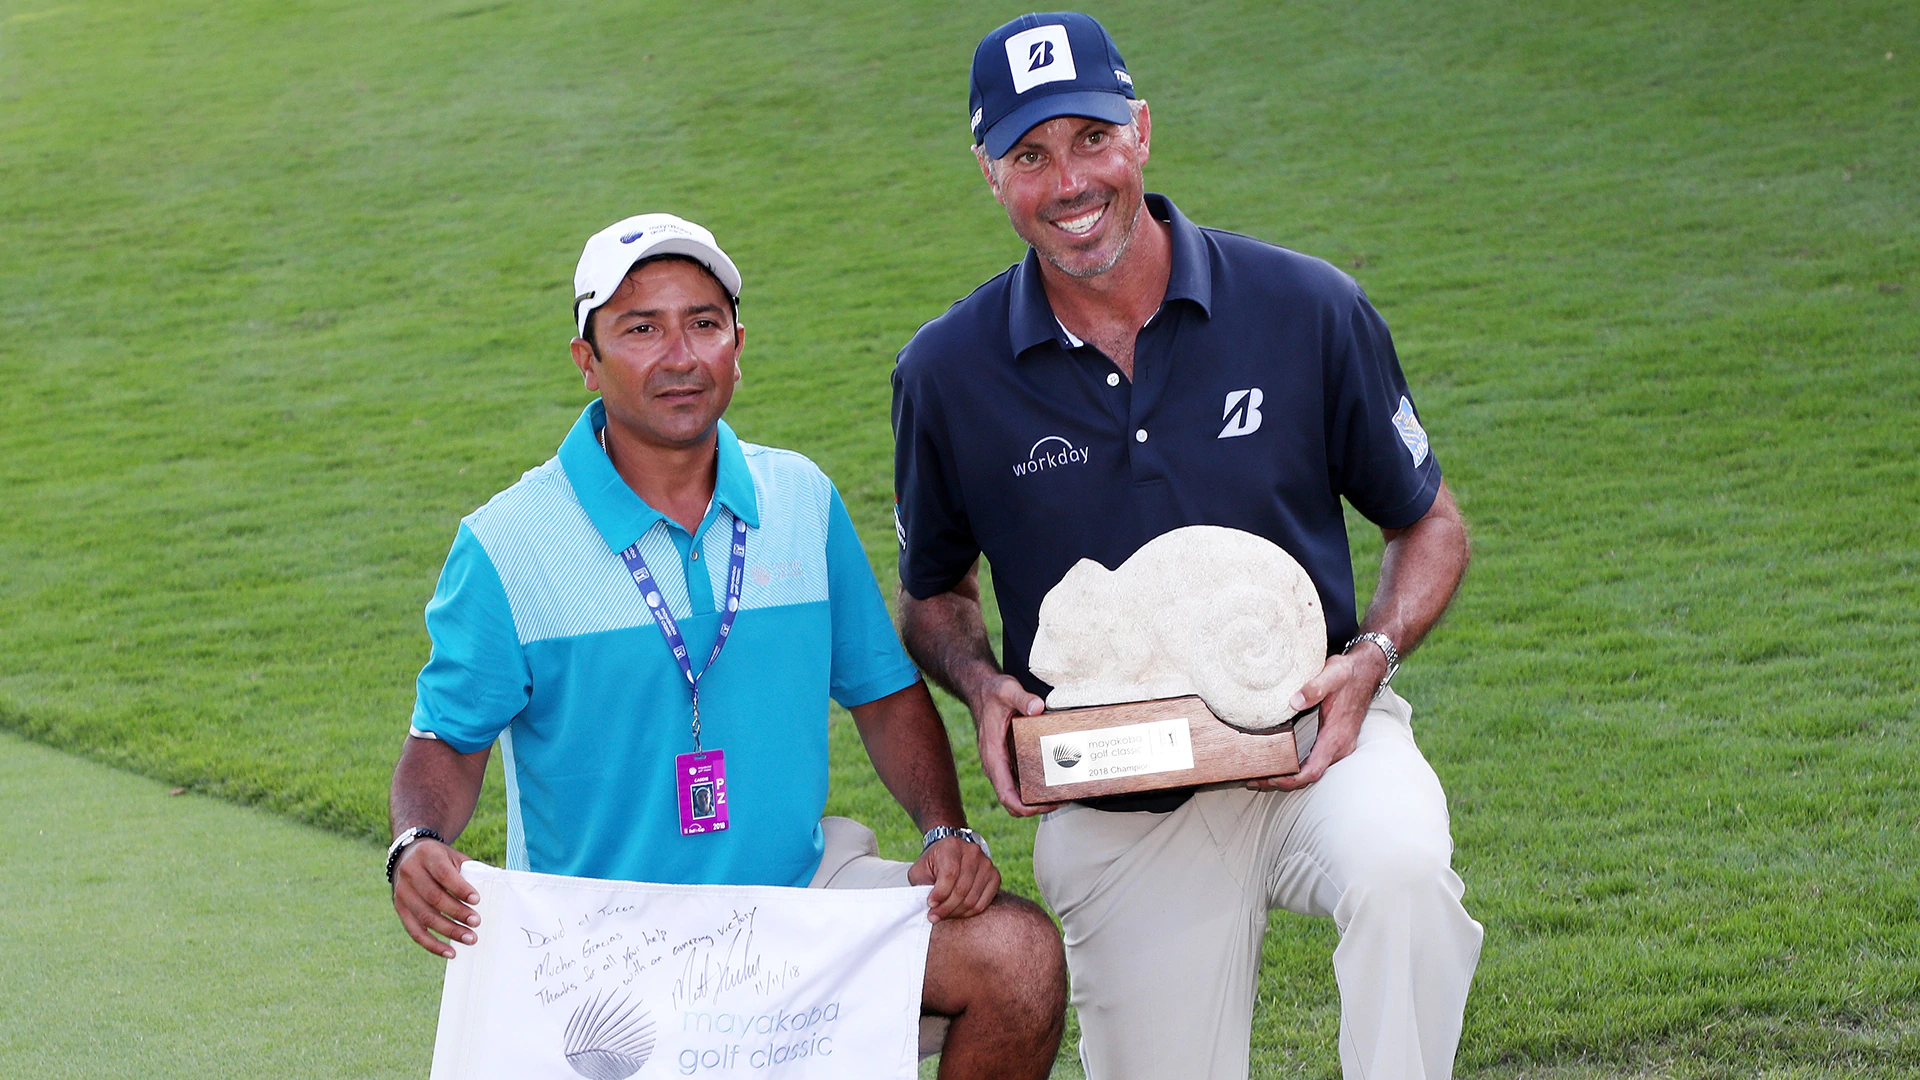 Kuchar apologizes, says he has paid caddie 'full total' requested